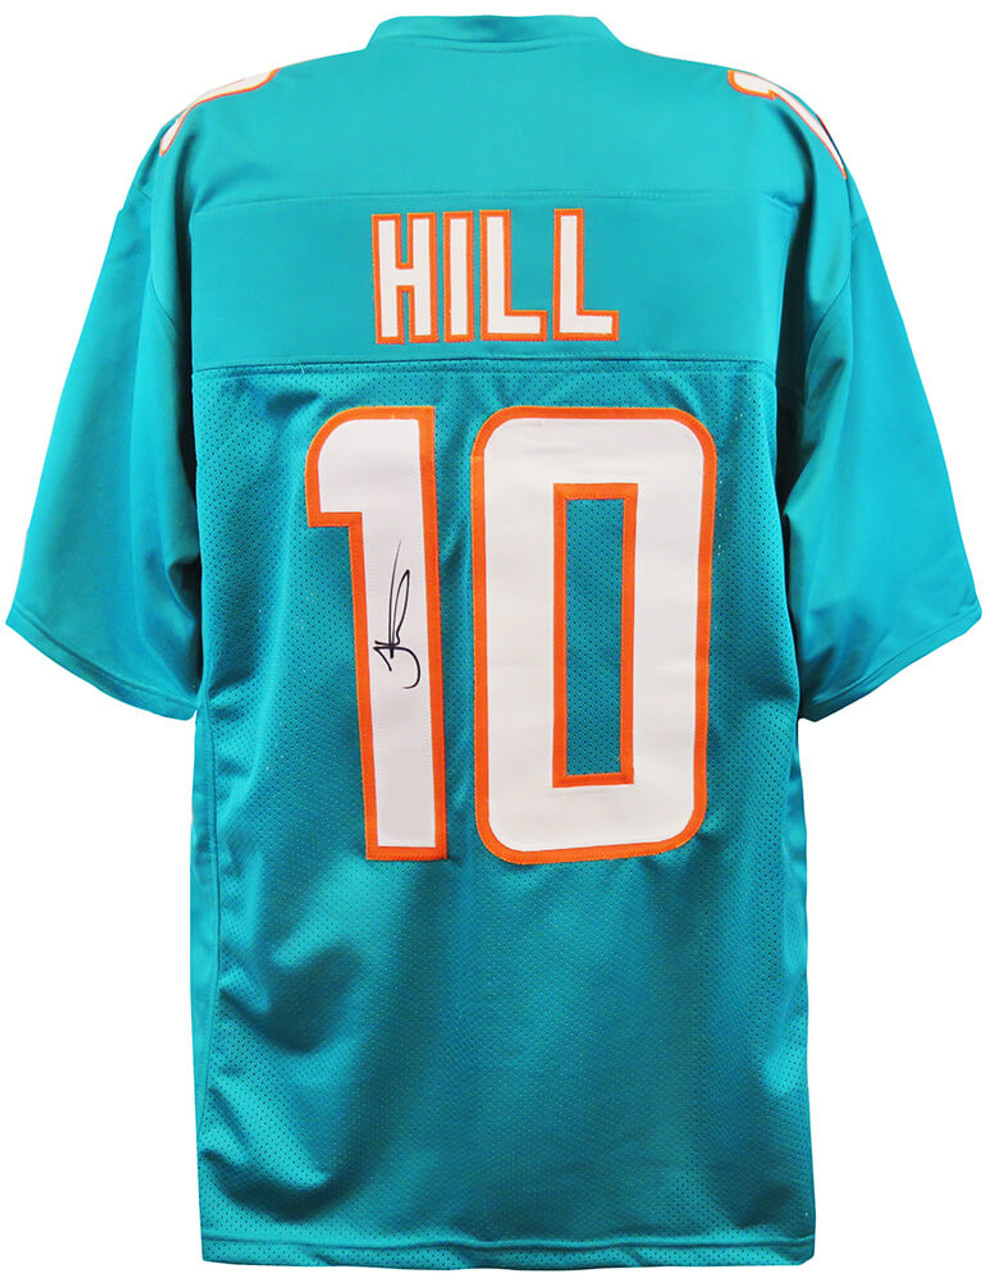 Shop Tyreek Hill Miami Dolphins Signed Pro Style Teal XL Jersey